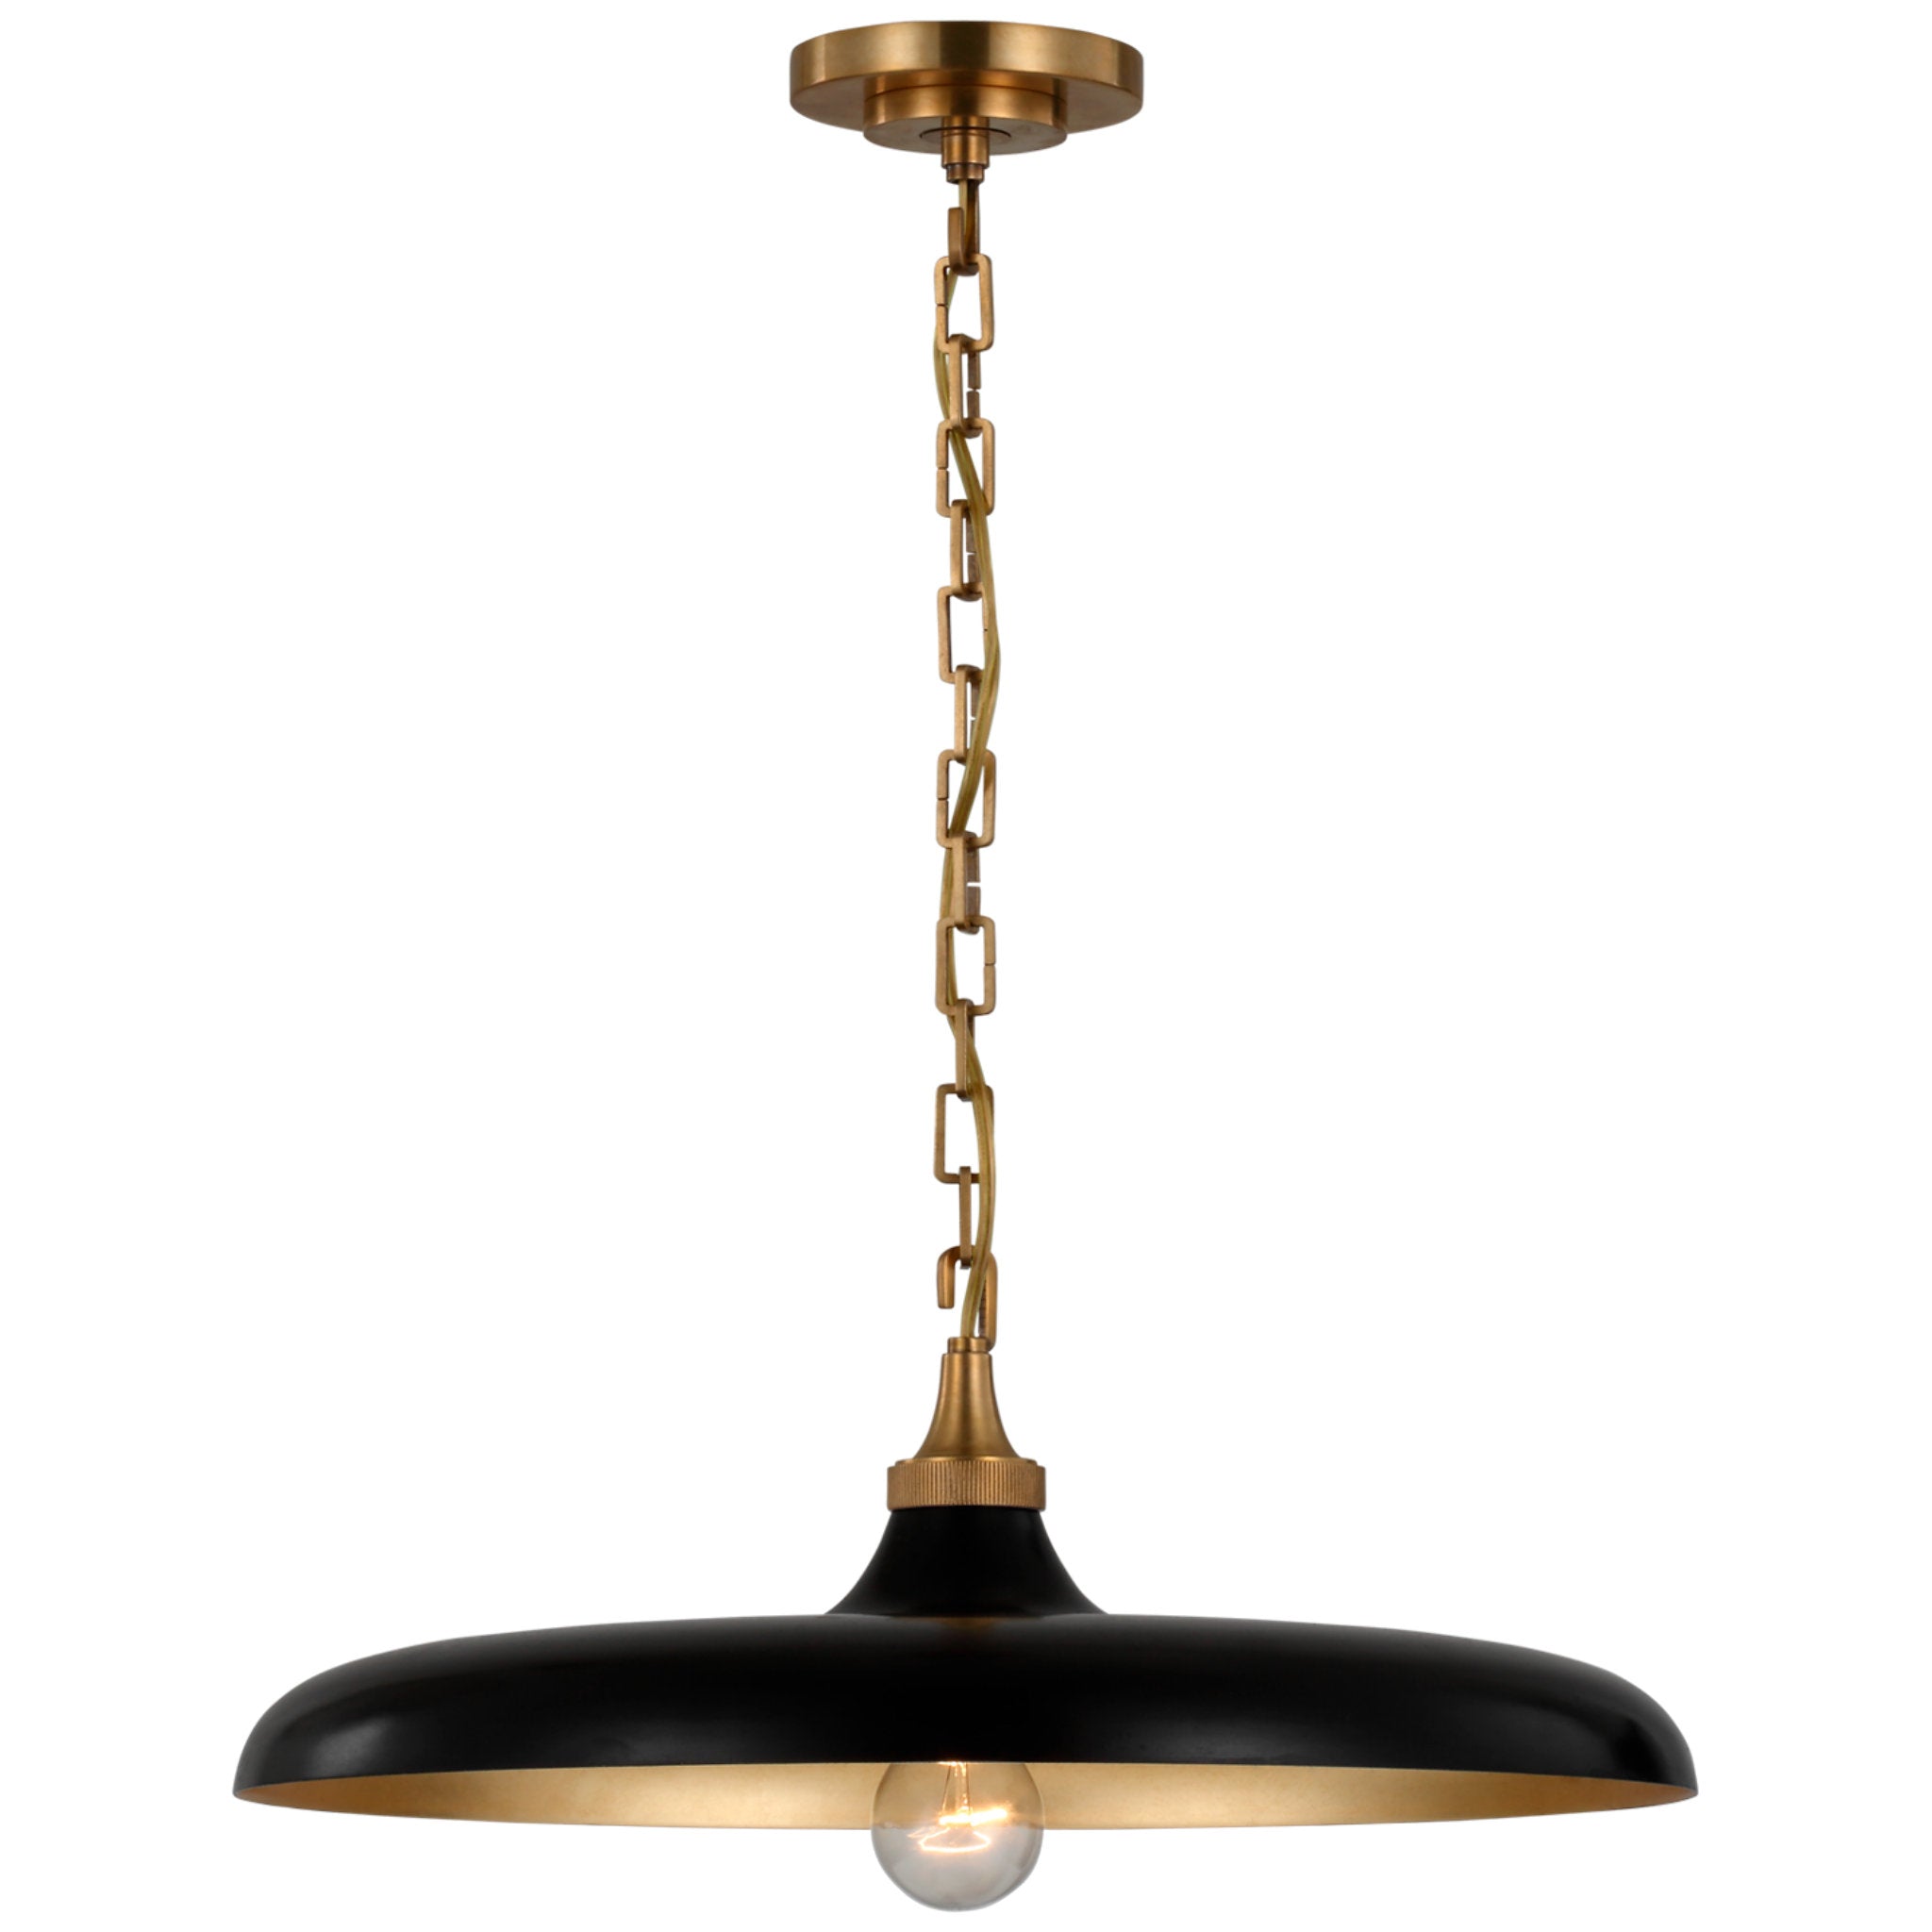 Thomas O'Brien Piatto Medium Pendant in Hand-Rubbed Antique Brass with Aged Iron Shade